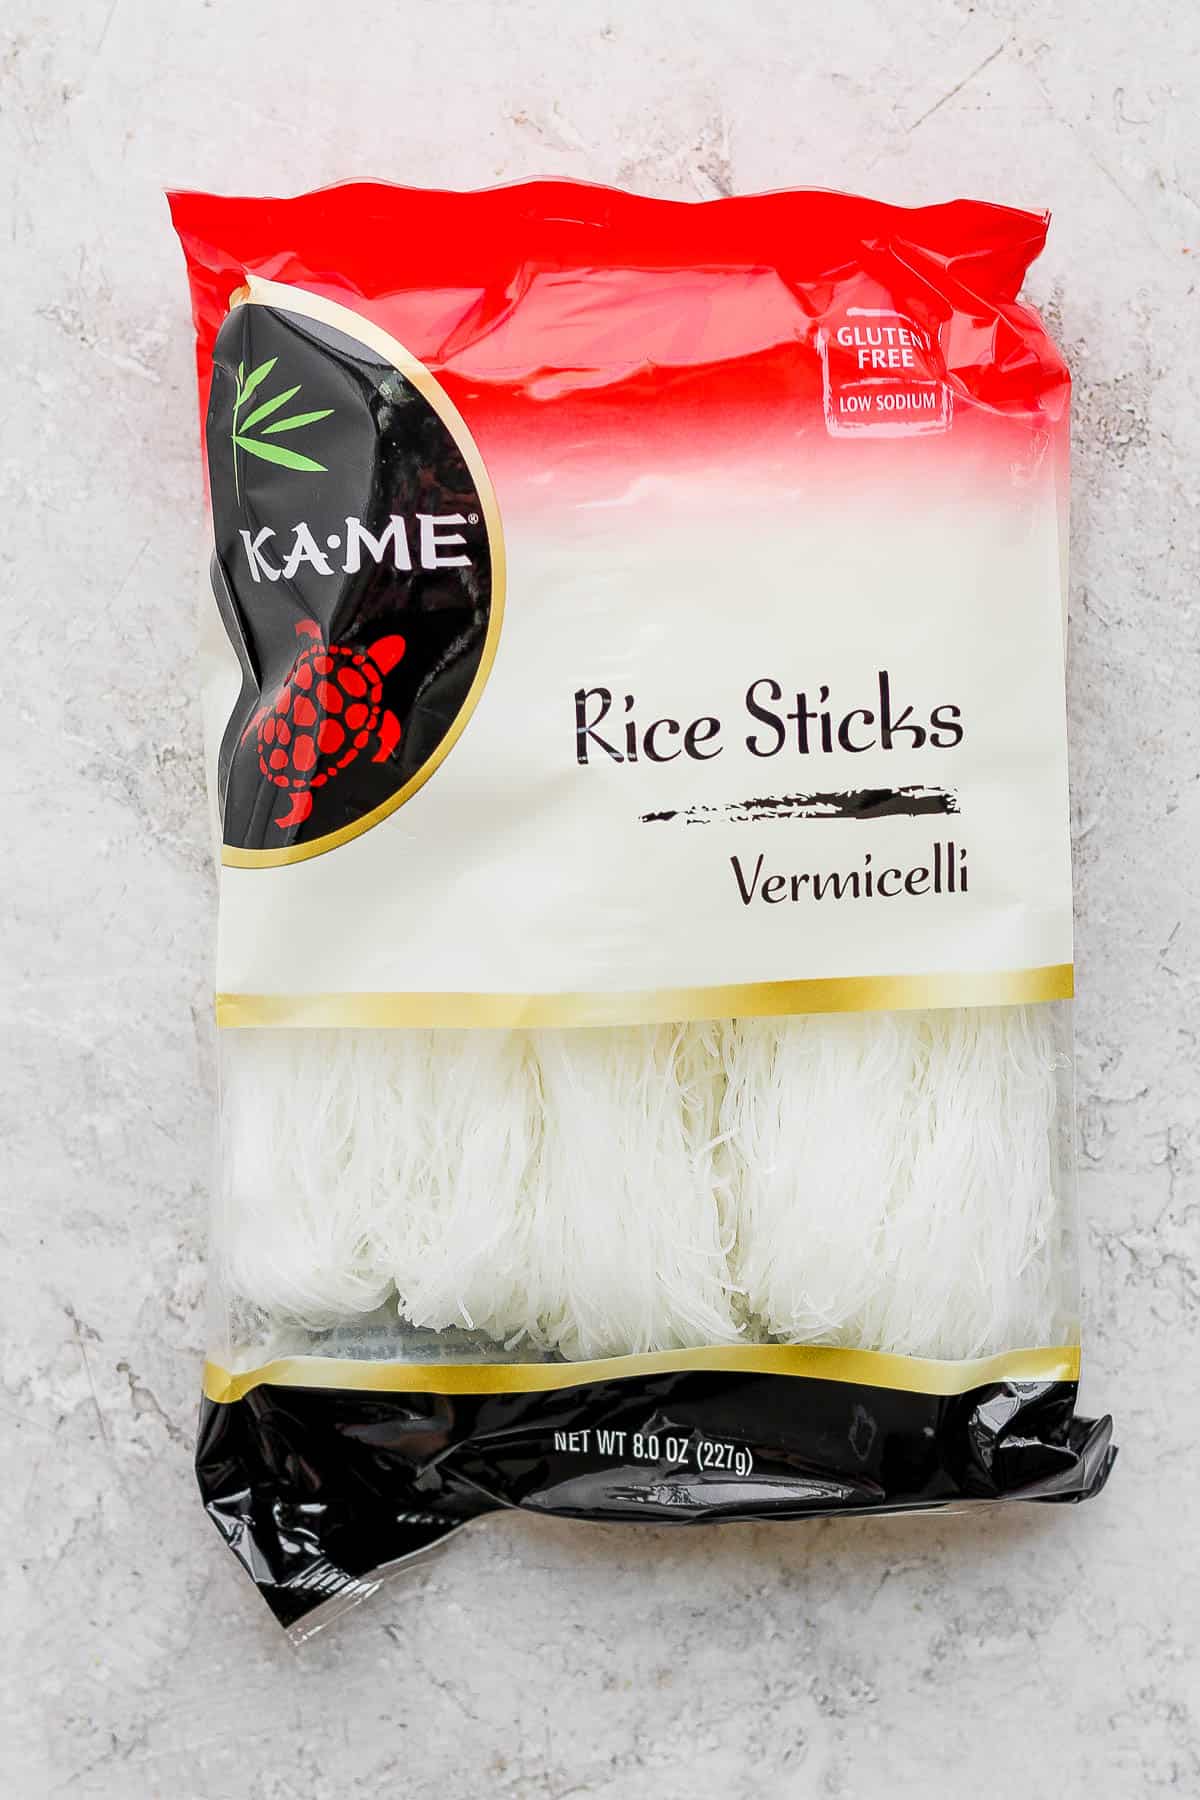 A bag of vermicelli rice noodles.